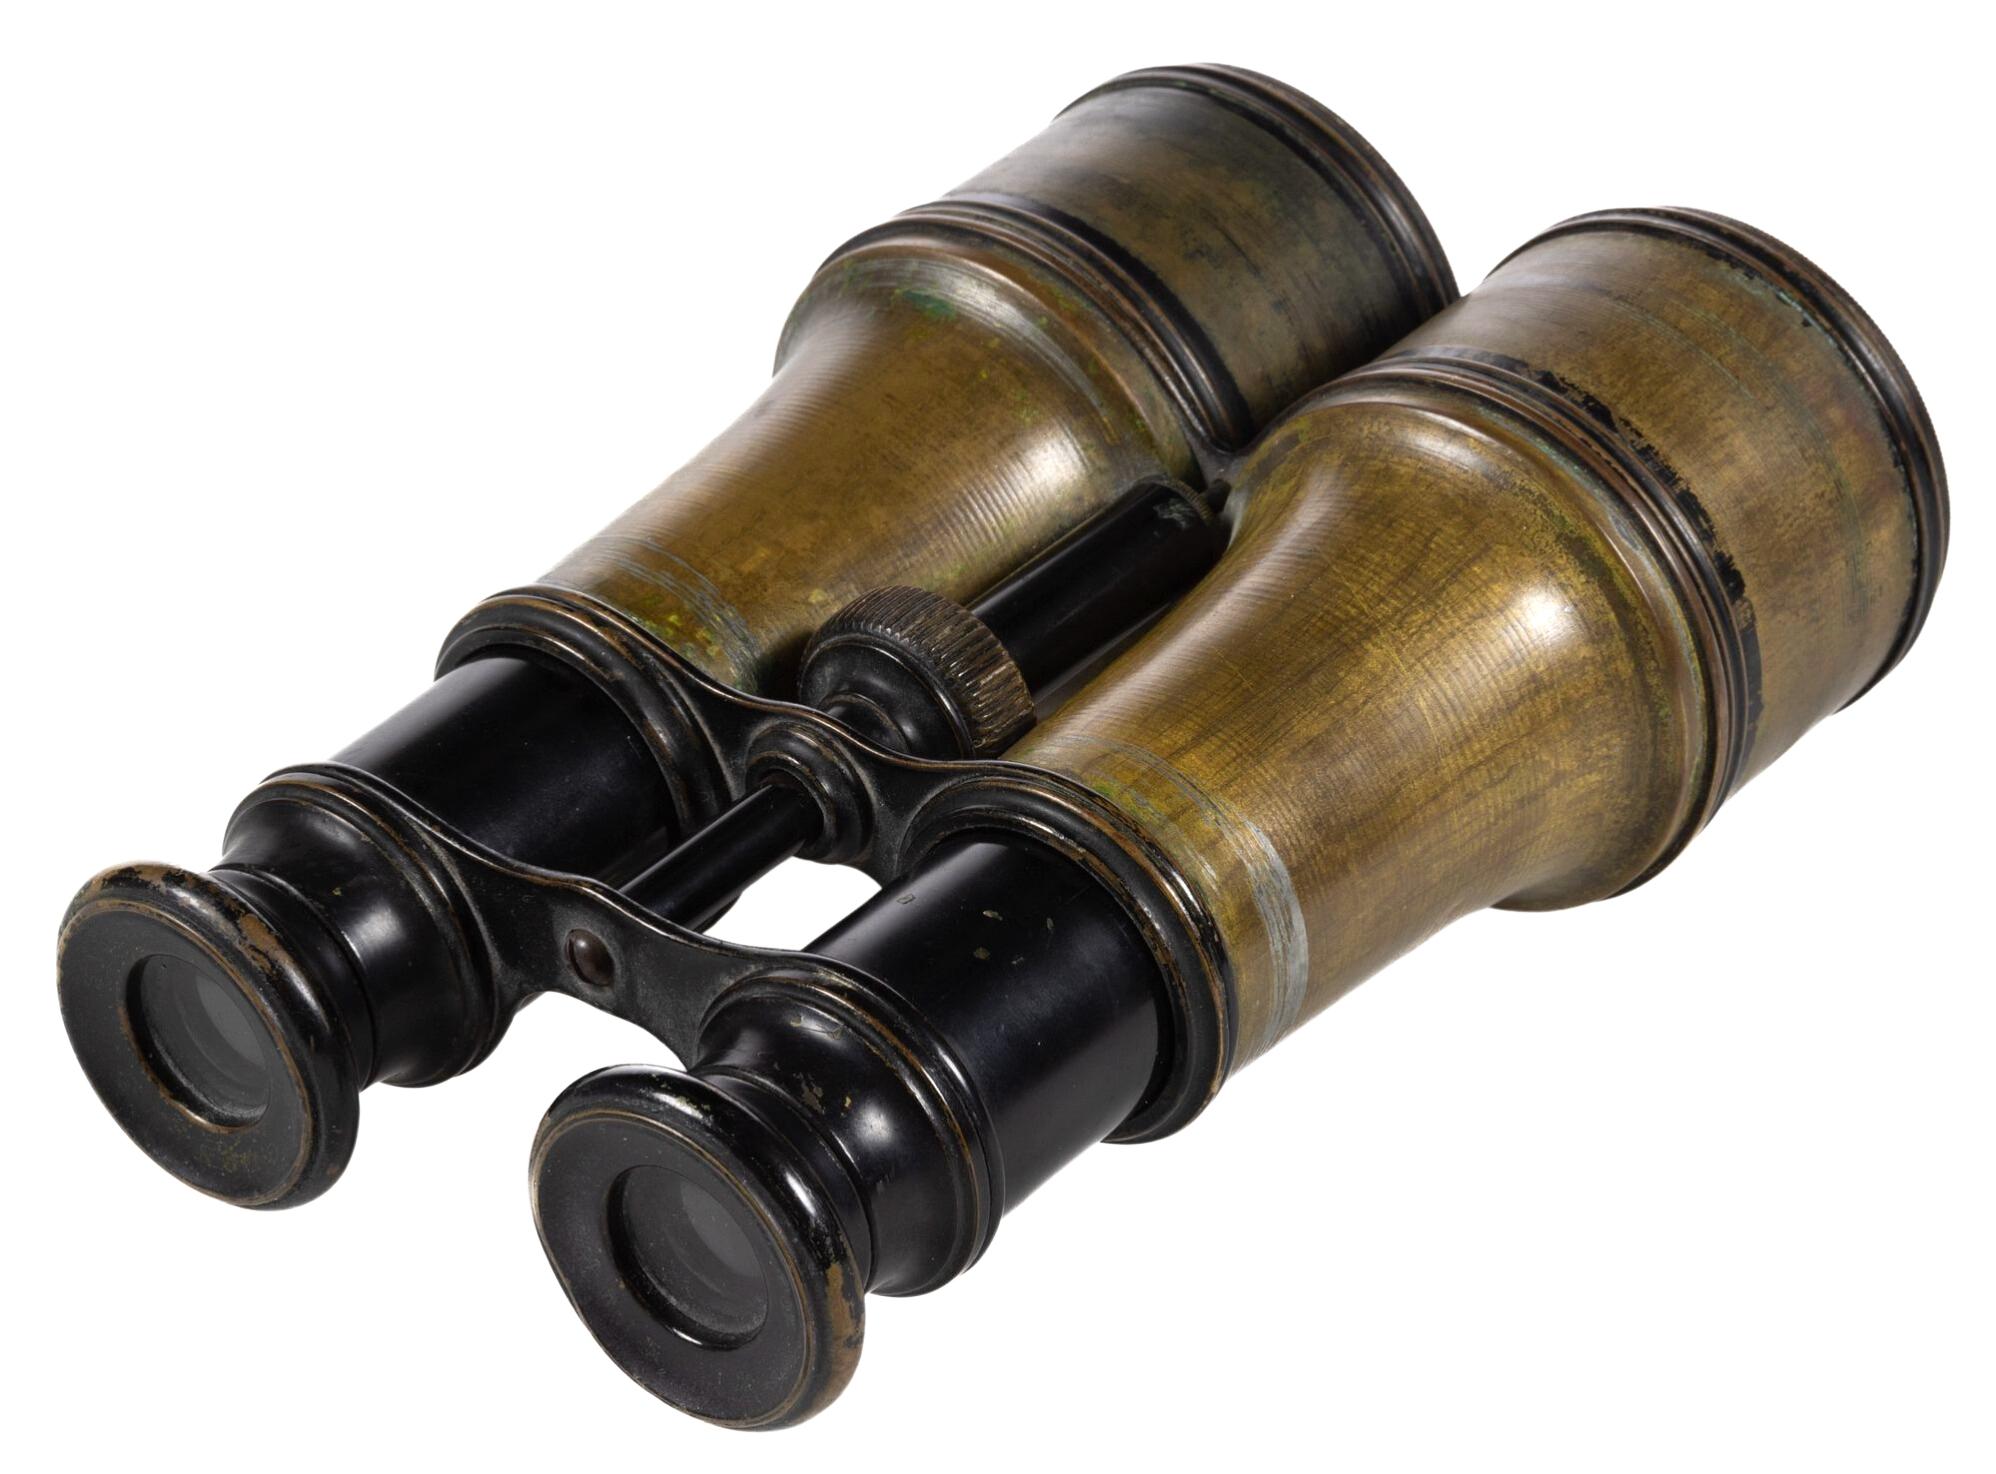 Presented is an original pair of Civil War-used field glasses. The field glasses were used by Captain Abraham Byrd of Virginia during the War. The glasses, an intricate example of brass and glass technology, were made in Paris, France by L’Aiglon.